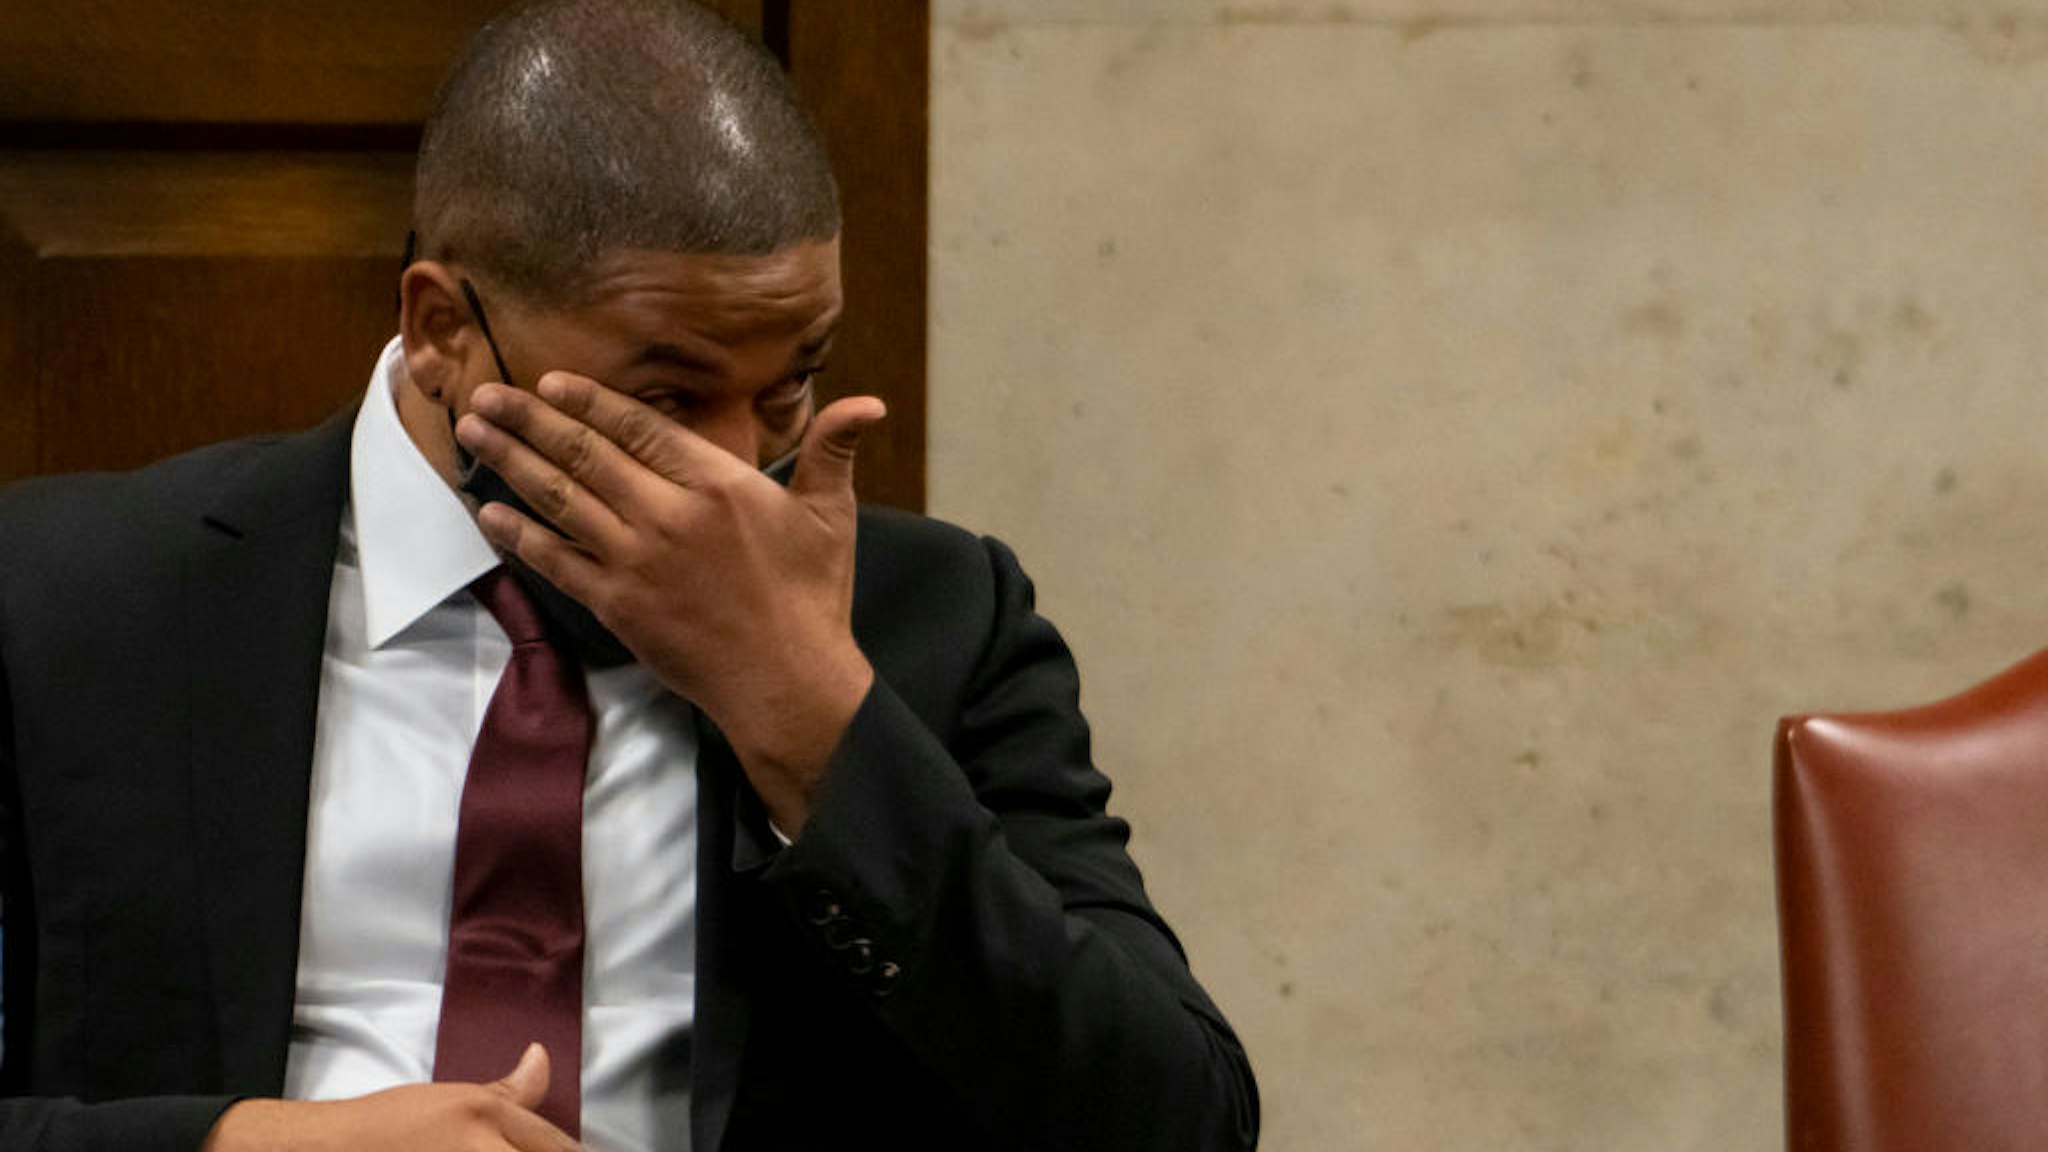 Actor Jussie Smollett tears up while listening to his brother testify at his sentencing hearing Thursday, March 10, 2022 at the Leighton Criminal Court Building. (Brian Cassella/Pool/Chicago Tribune)